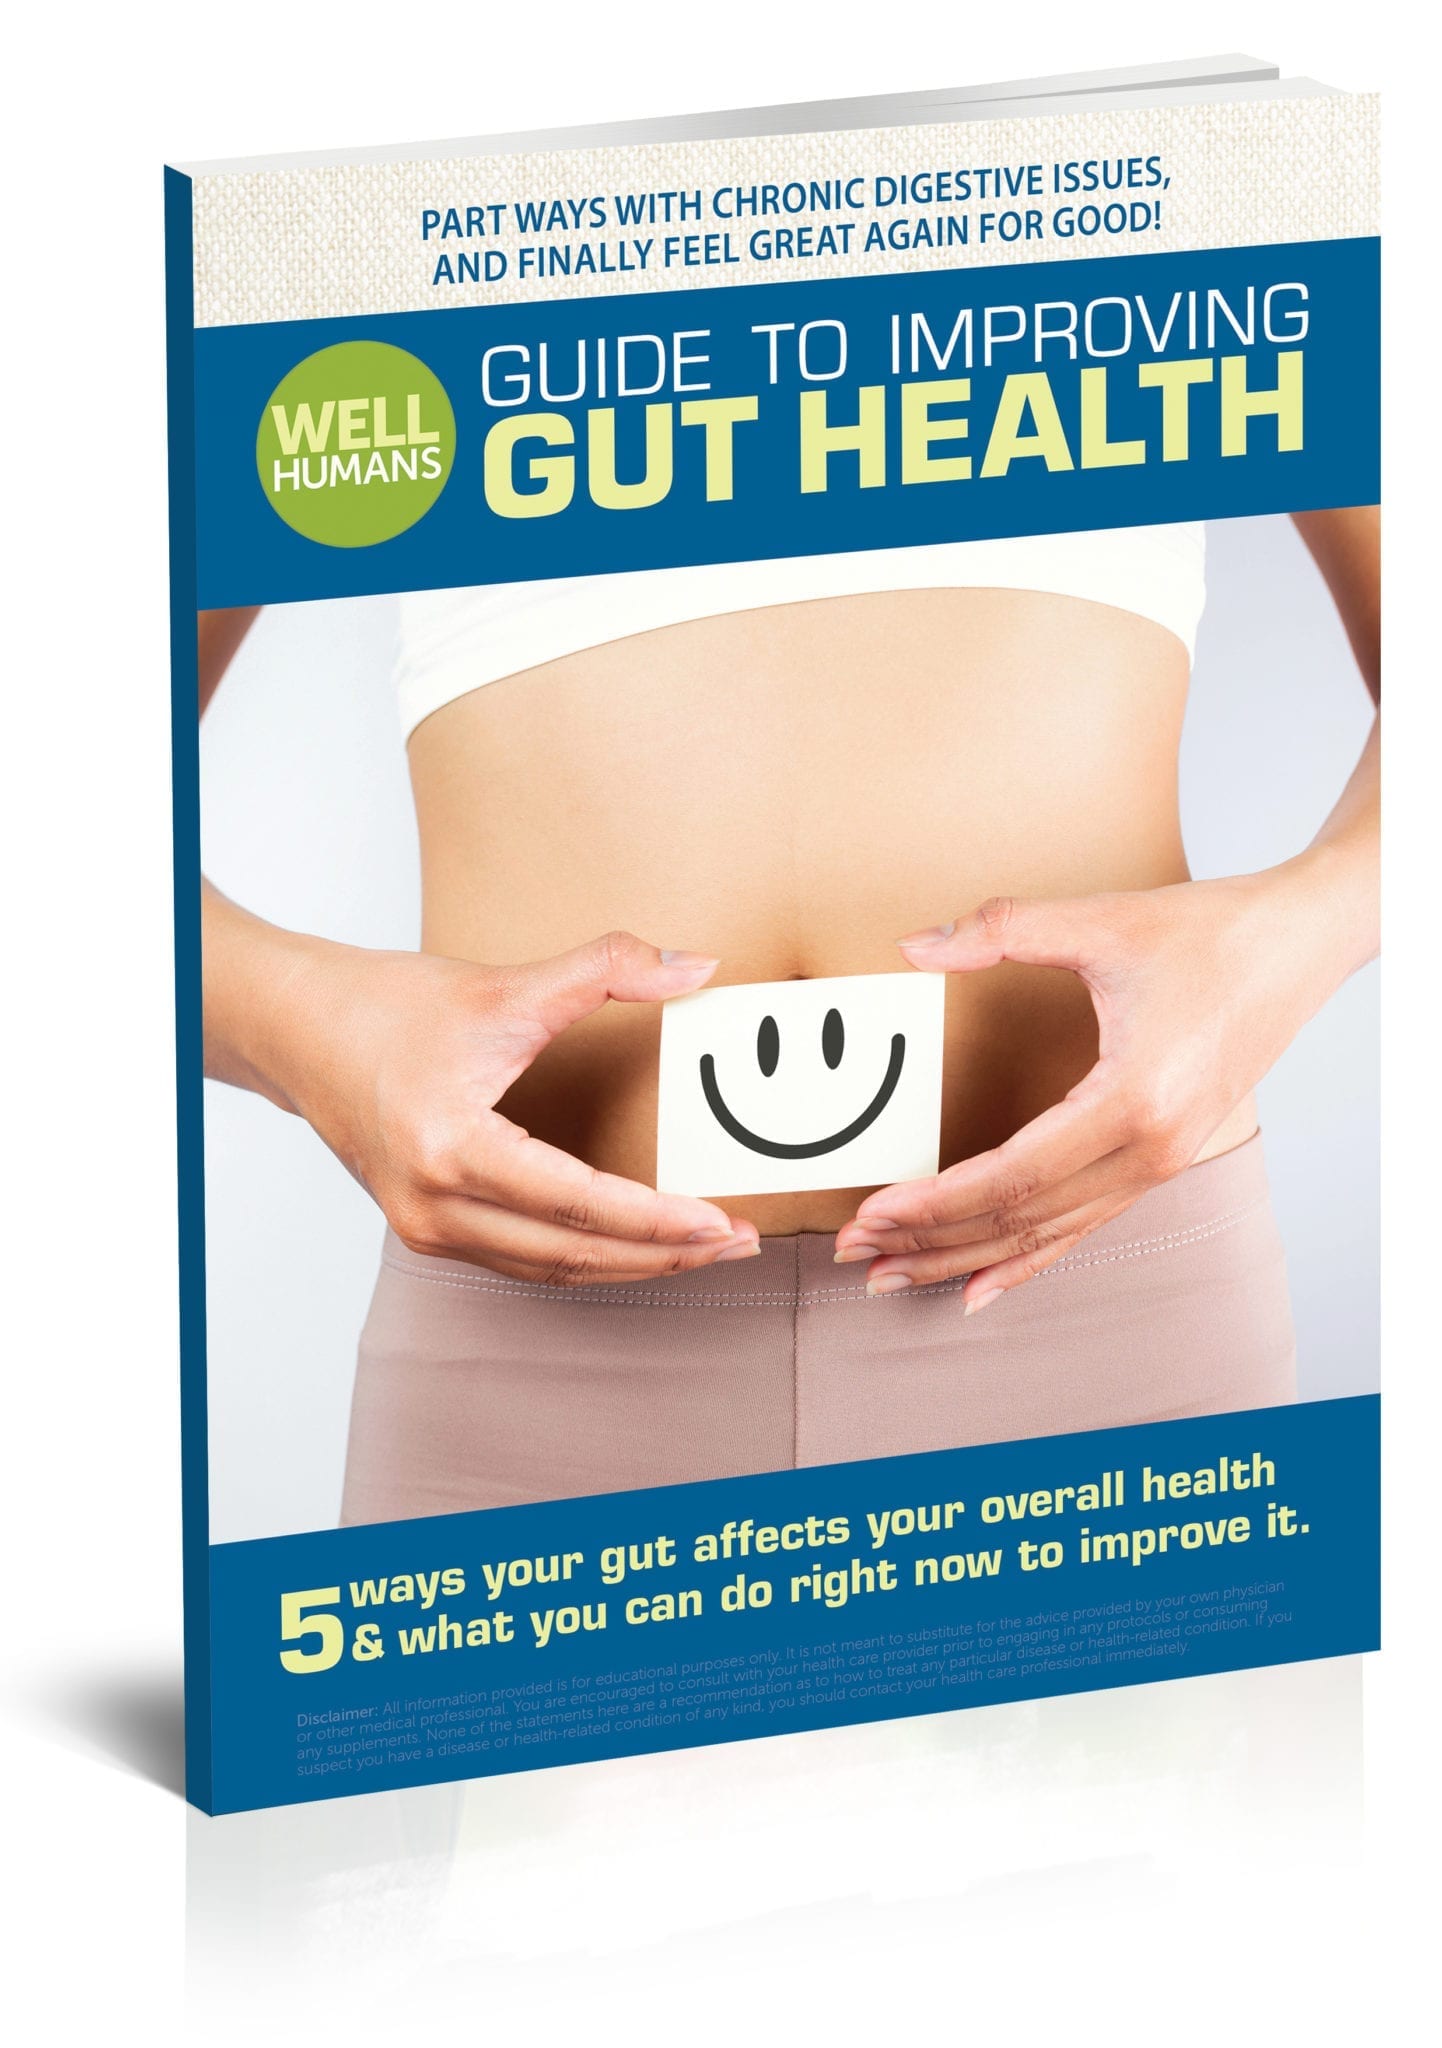 Well Humans Guide to Improving Gut Health